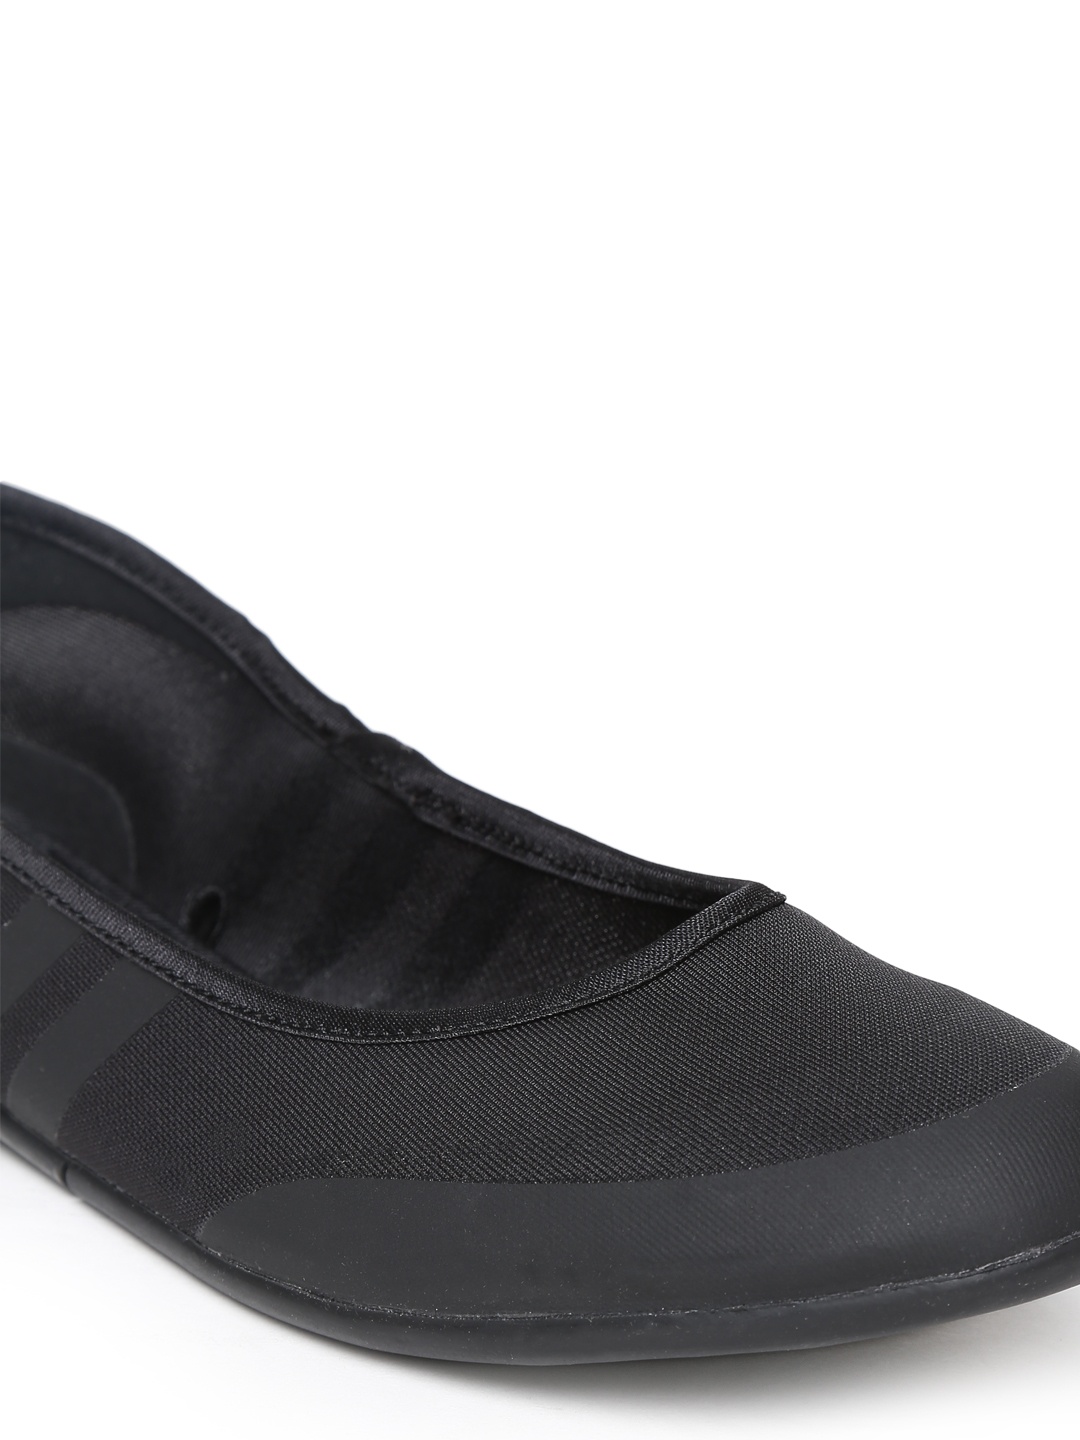 View Product Details More Flats by Adidas NEO More Black Flats More Flats